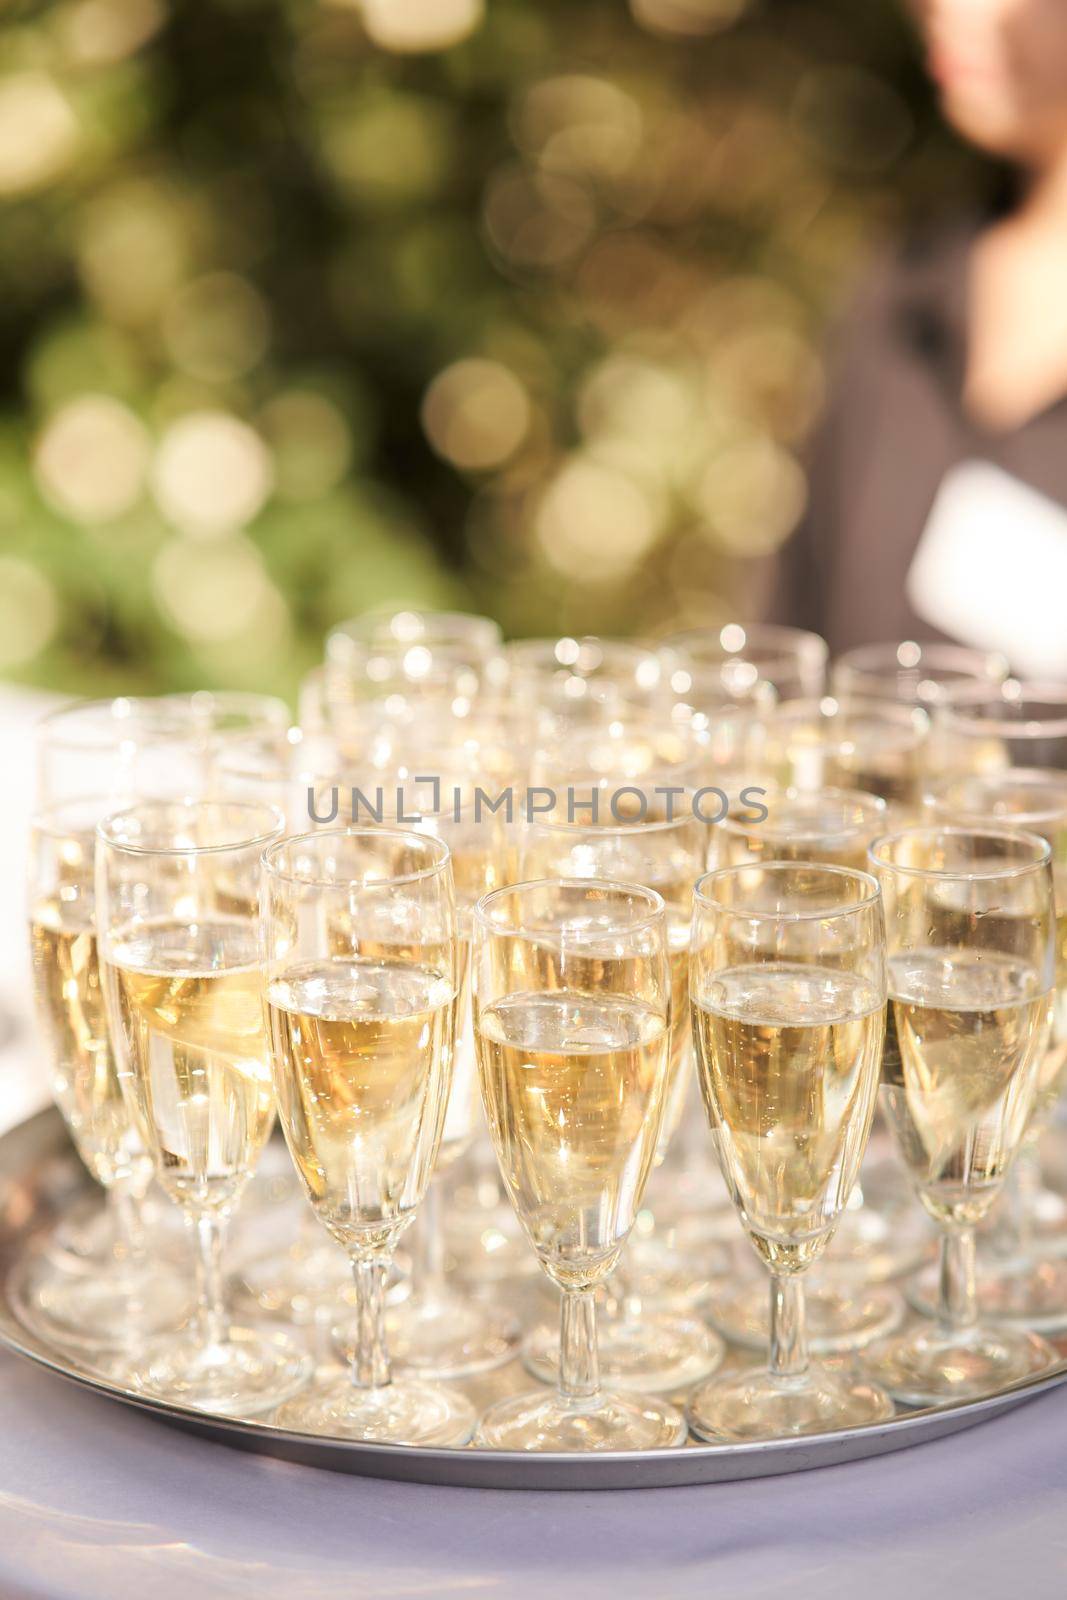 Glasses of champagne on a silver tray at a family celebration. High-quality photo